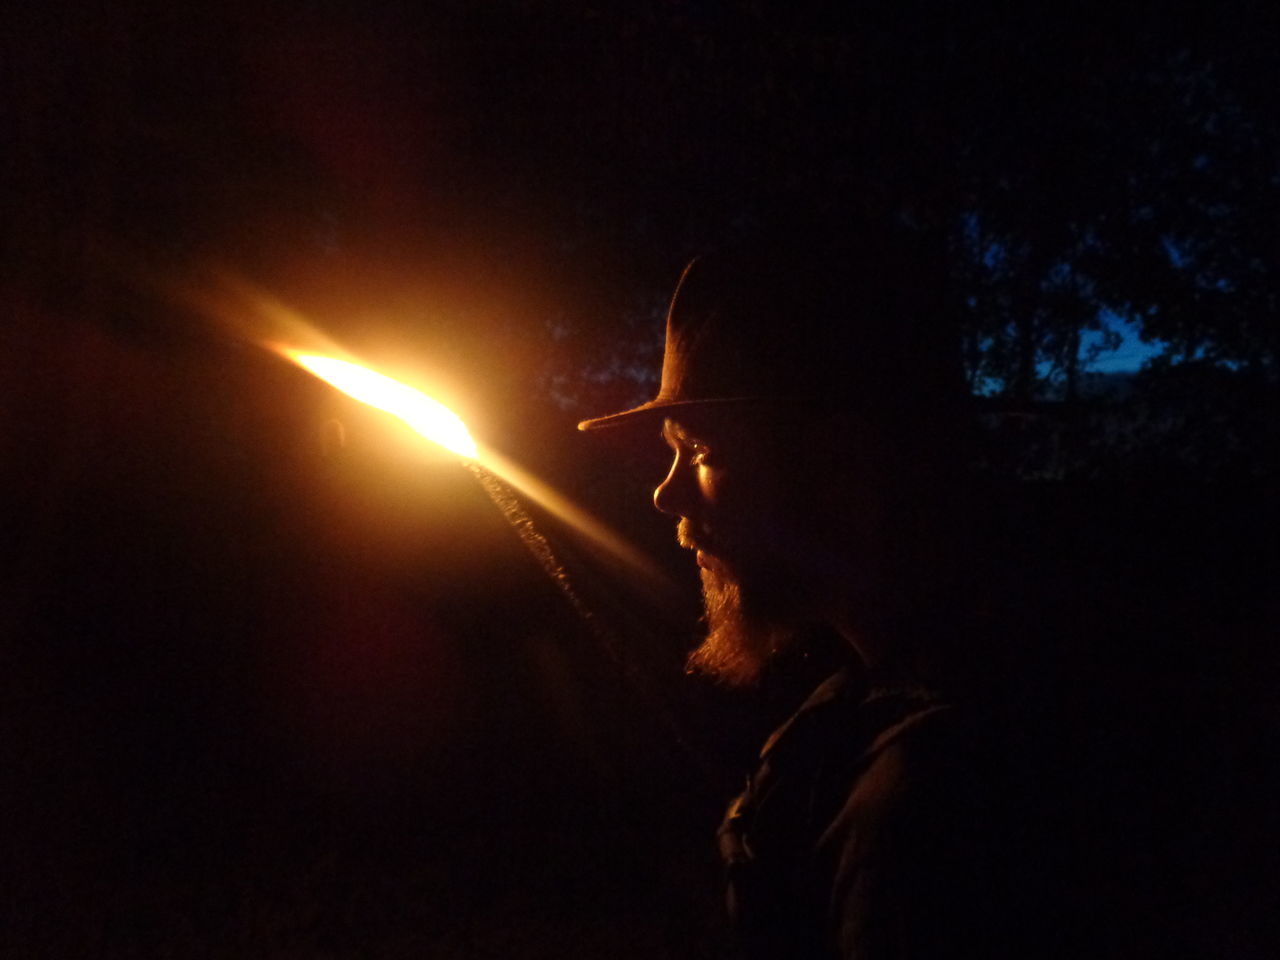 light, darkness, night, one person, sparkler, adult, illuminated, side view, nature, burning, fireworks, young adult, fire, glowing